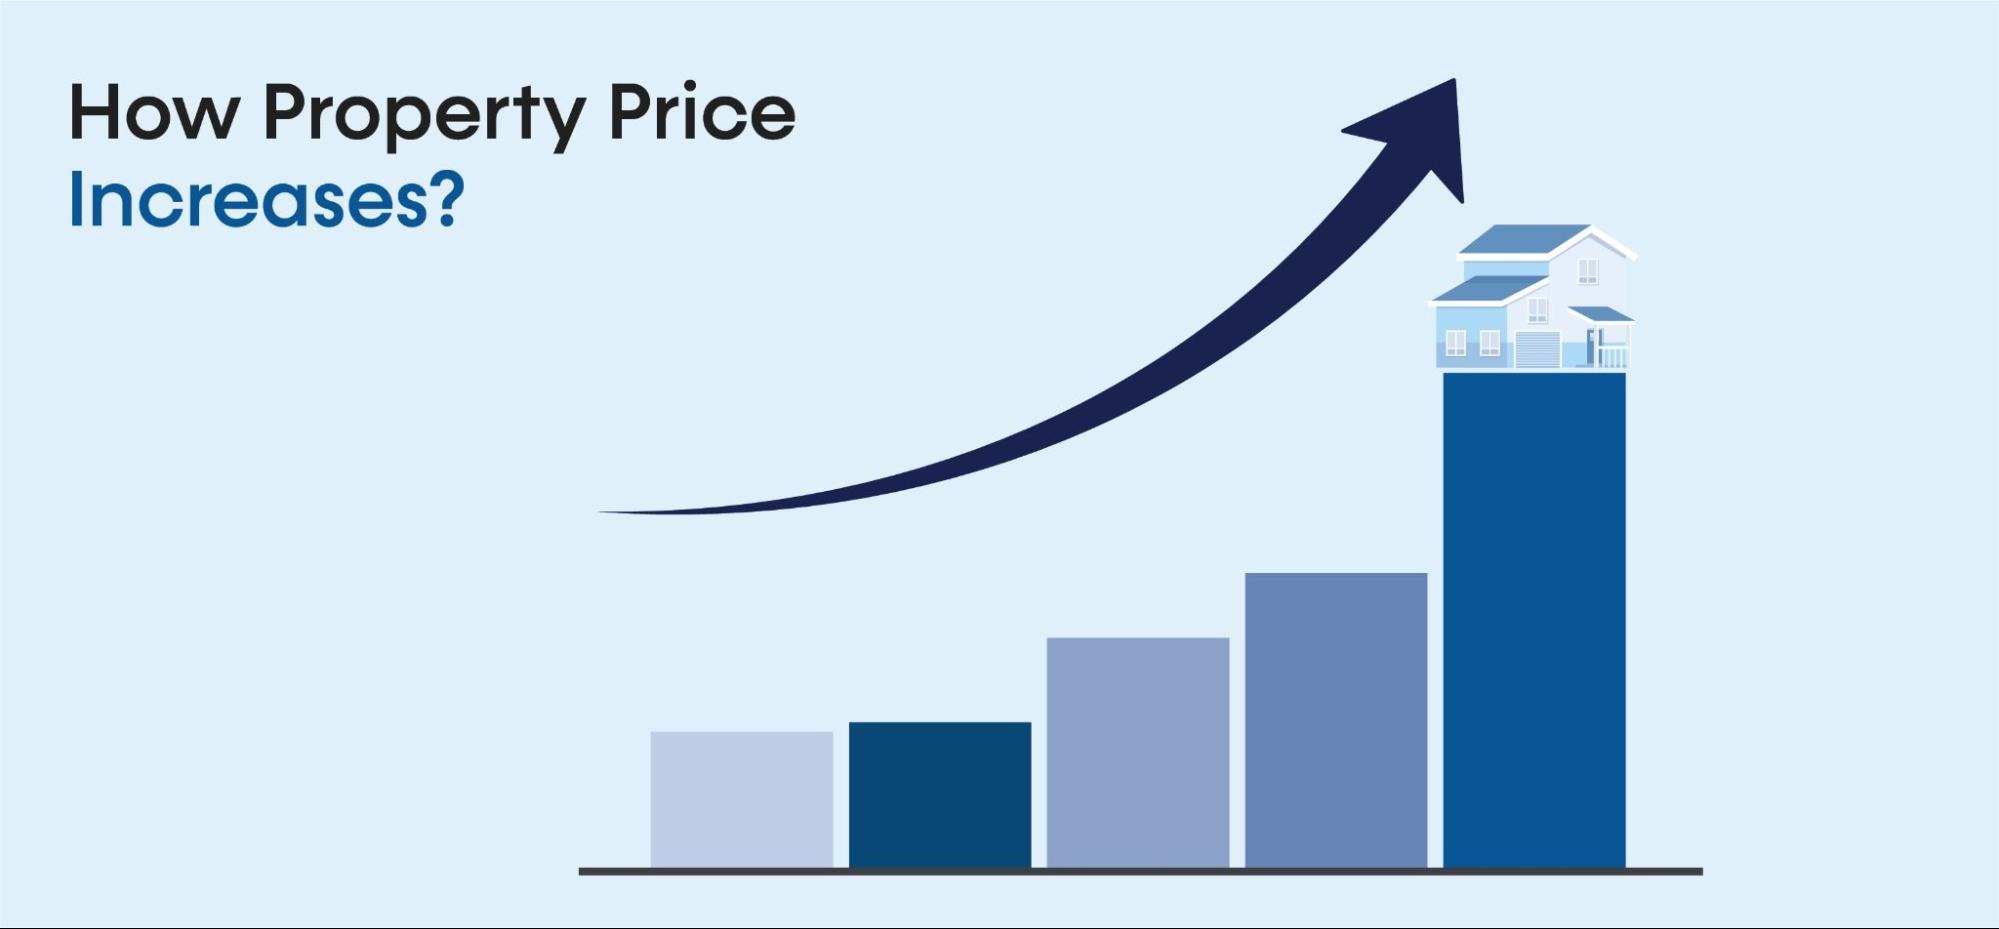 How do property prices increase